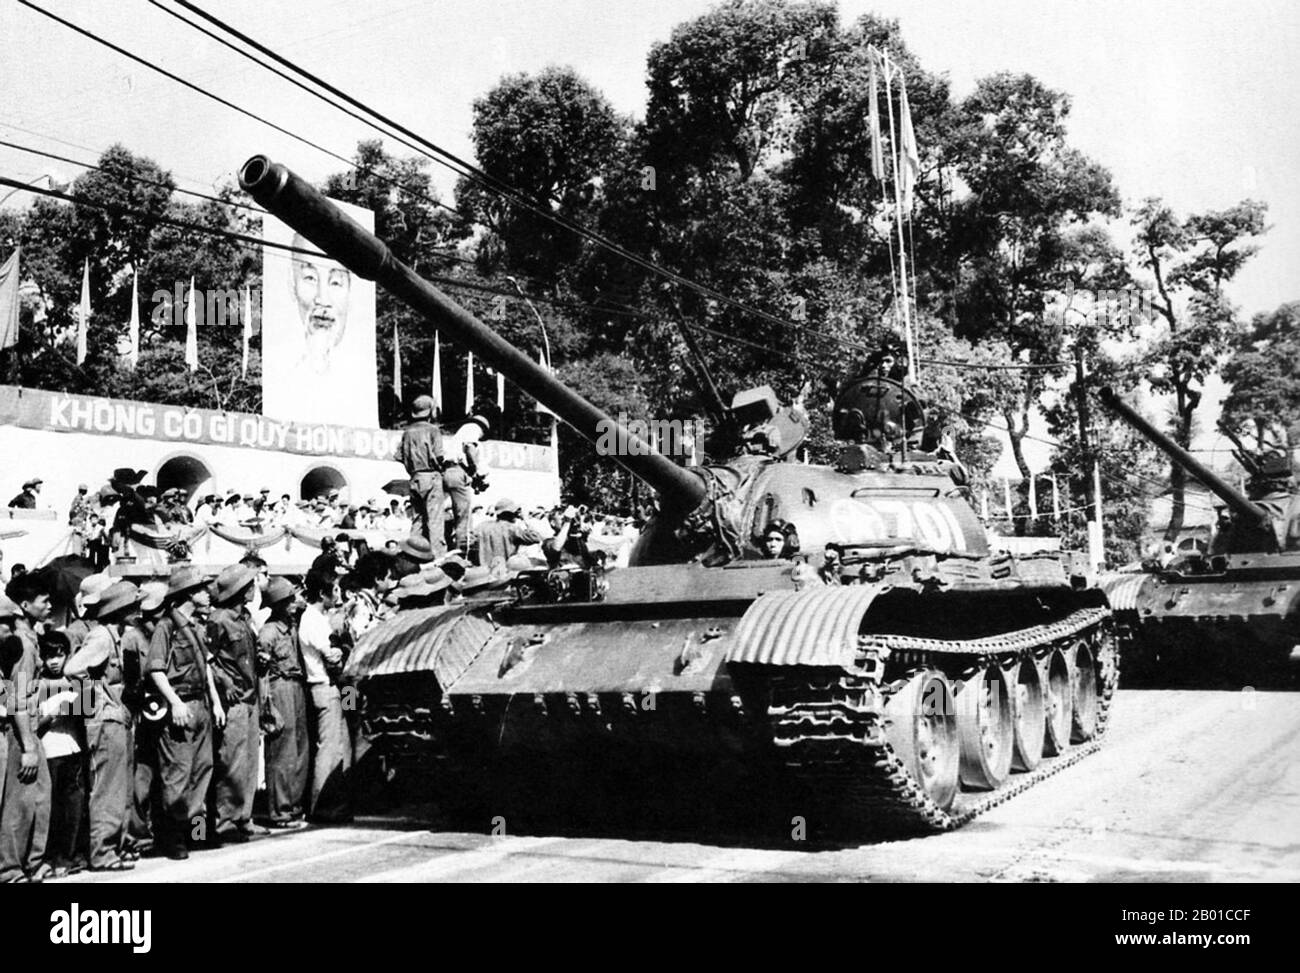 Vietnam: North Vietnamese T54 tanks on a victory parade through the streets of Saigon, April 1975.  The Fall of Saigon was the capture/liberation of Saigon, the capital of South Vietnam, by the People's Army of Vietnam and the National Liberation Front on April 30, 1975. The event marked the end of the Vietnam War and the start of a transition period leading to the formal reunification of Vietnam under Communist rule.  North Vietnamese forces under the command of the Senior General Văn Tiến Dũng began their final attack on Saigon, which was commanded by General Nguyen Van Toan on April 29. Stock Photo